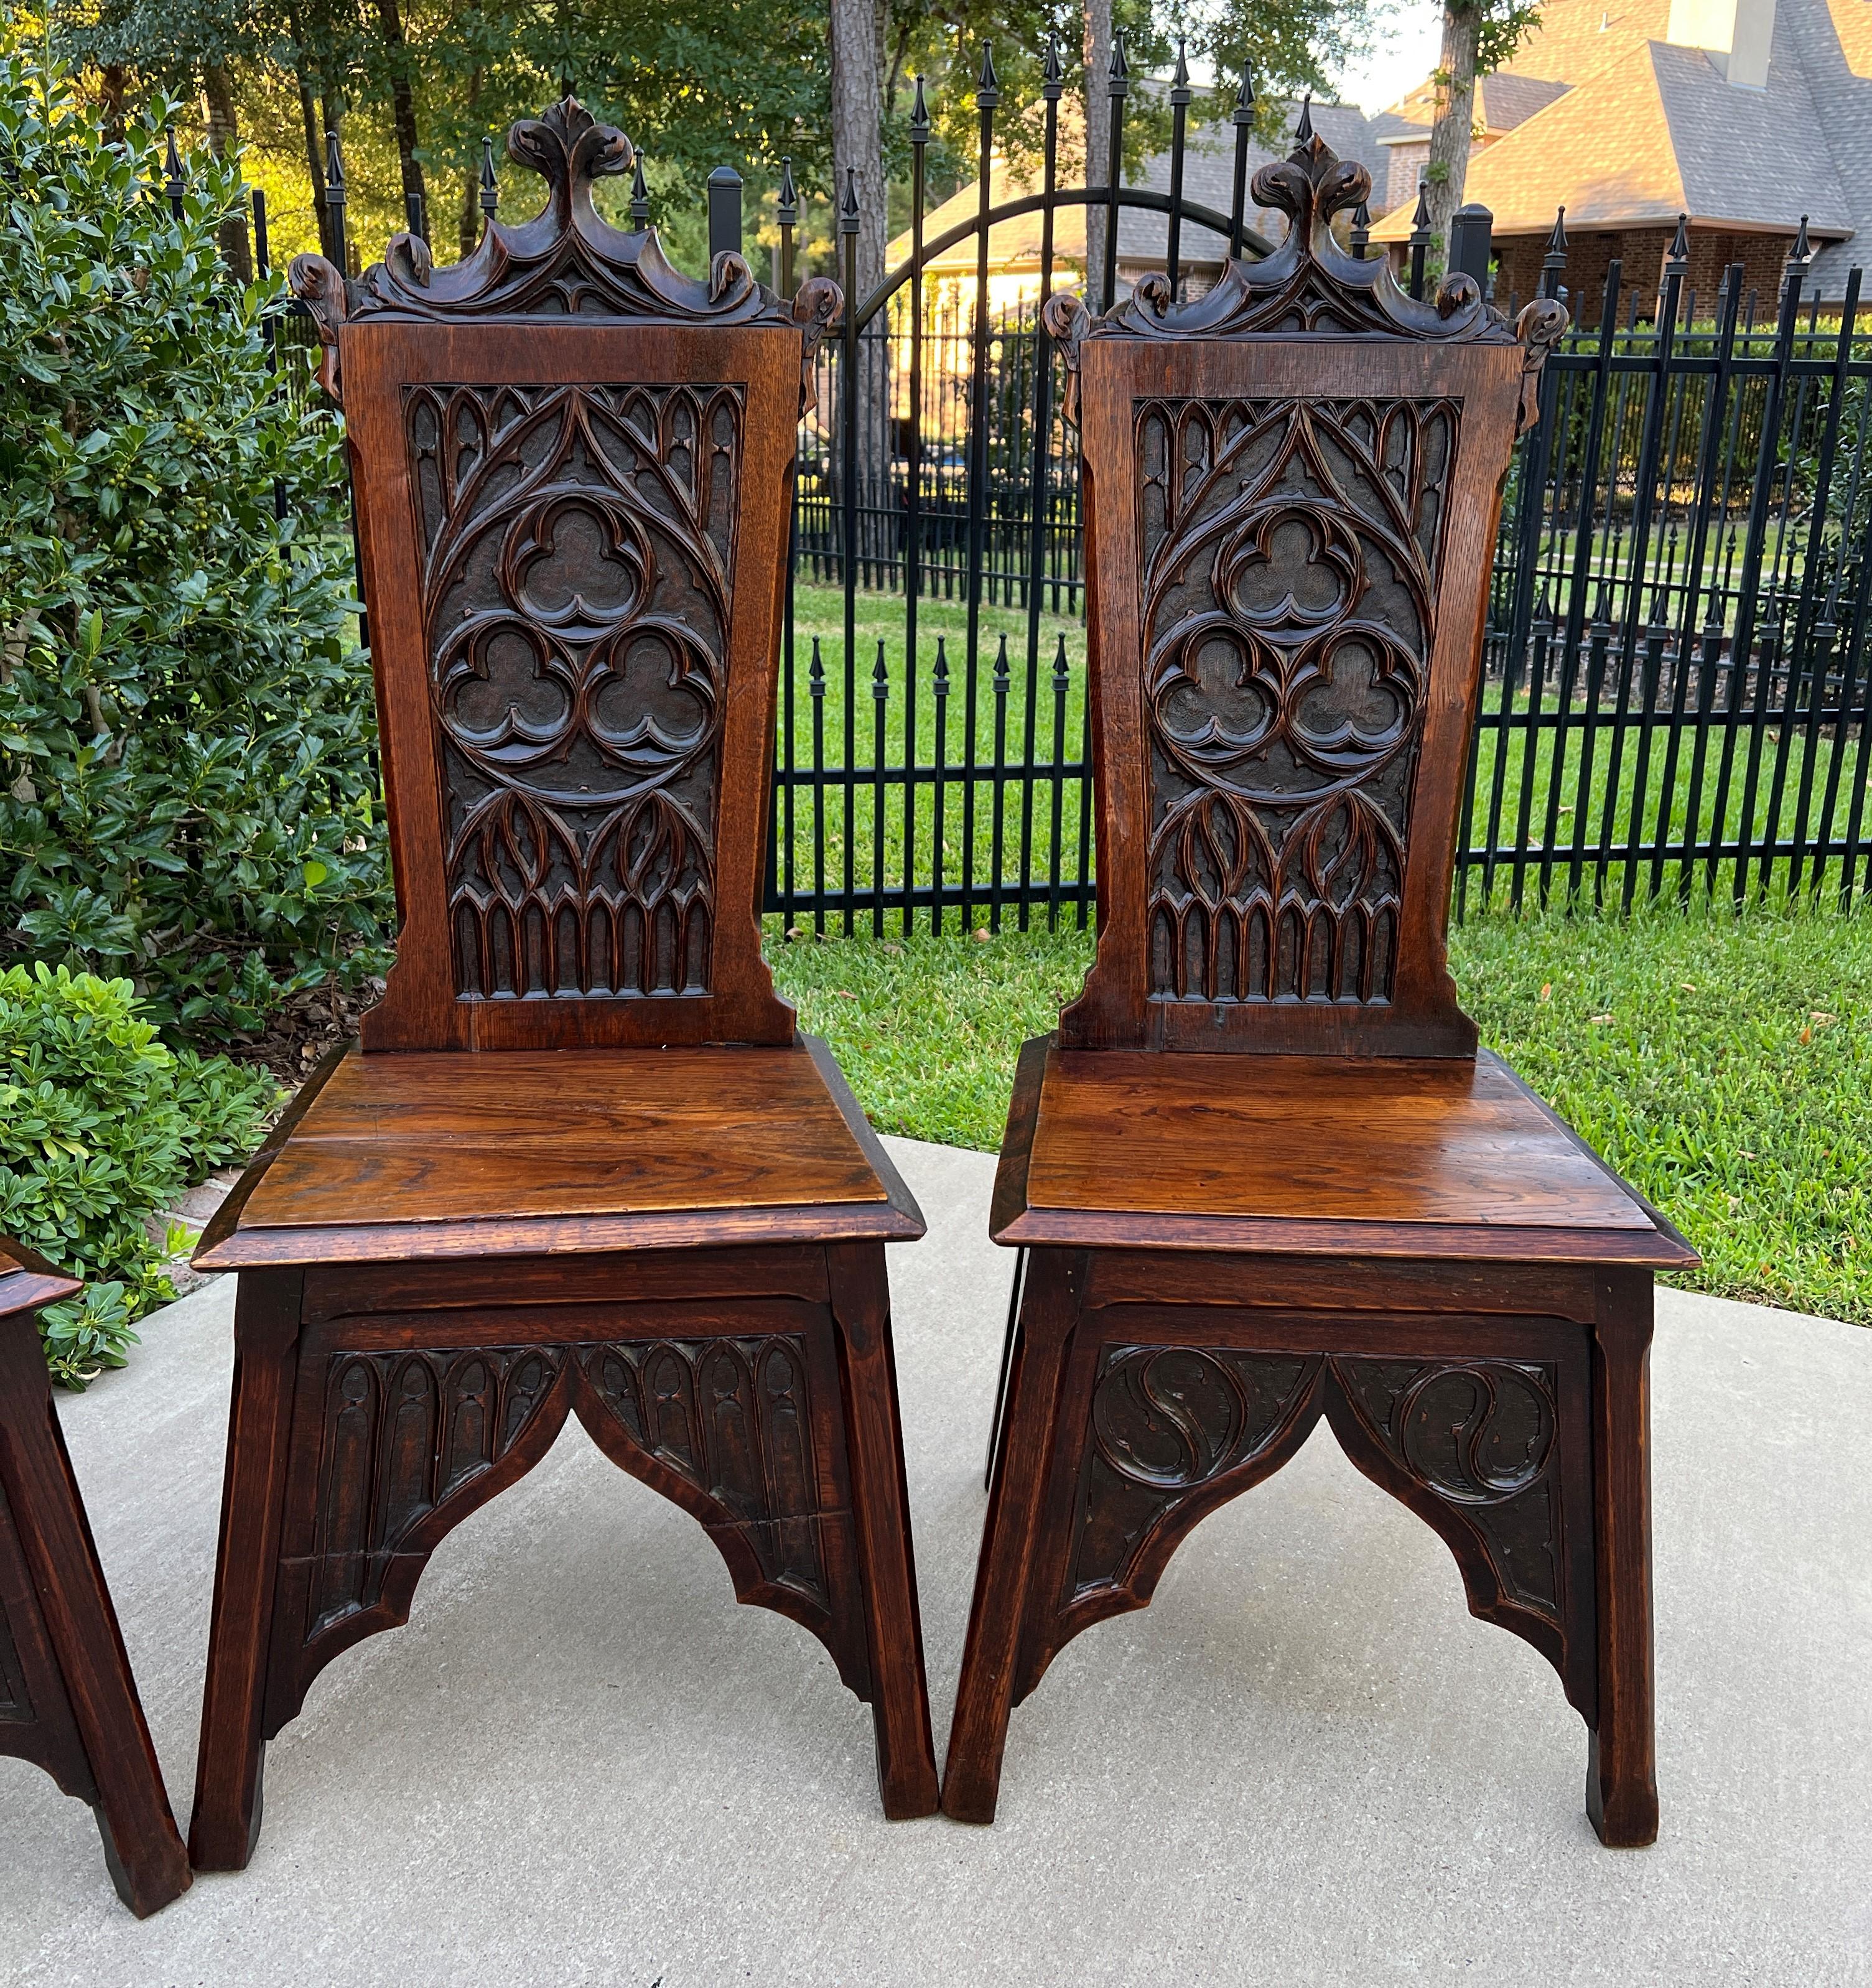 Carved Antique French Chairs Set of 6 Gothic Revival Oak Pegged Dining Side Chairs 19C